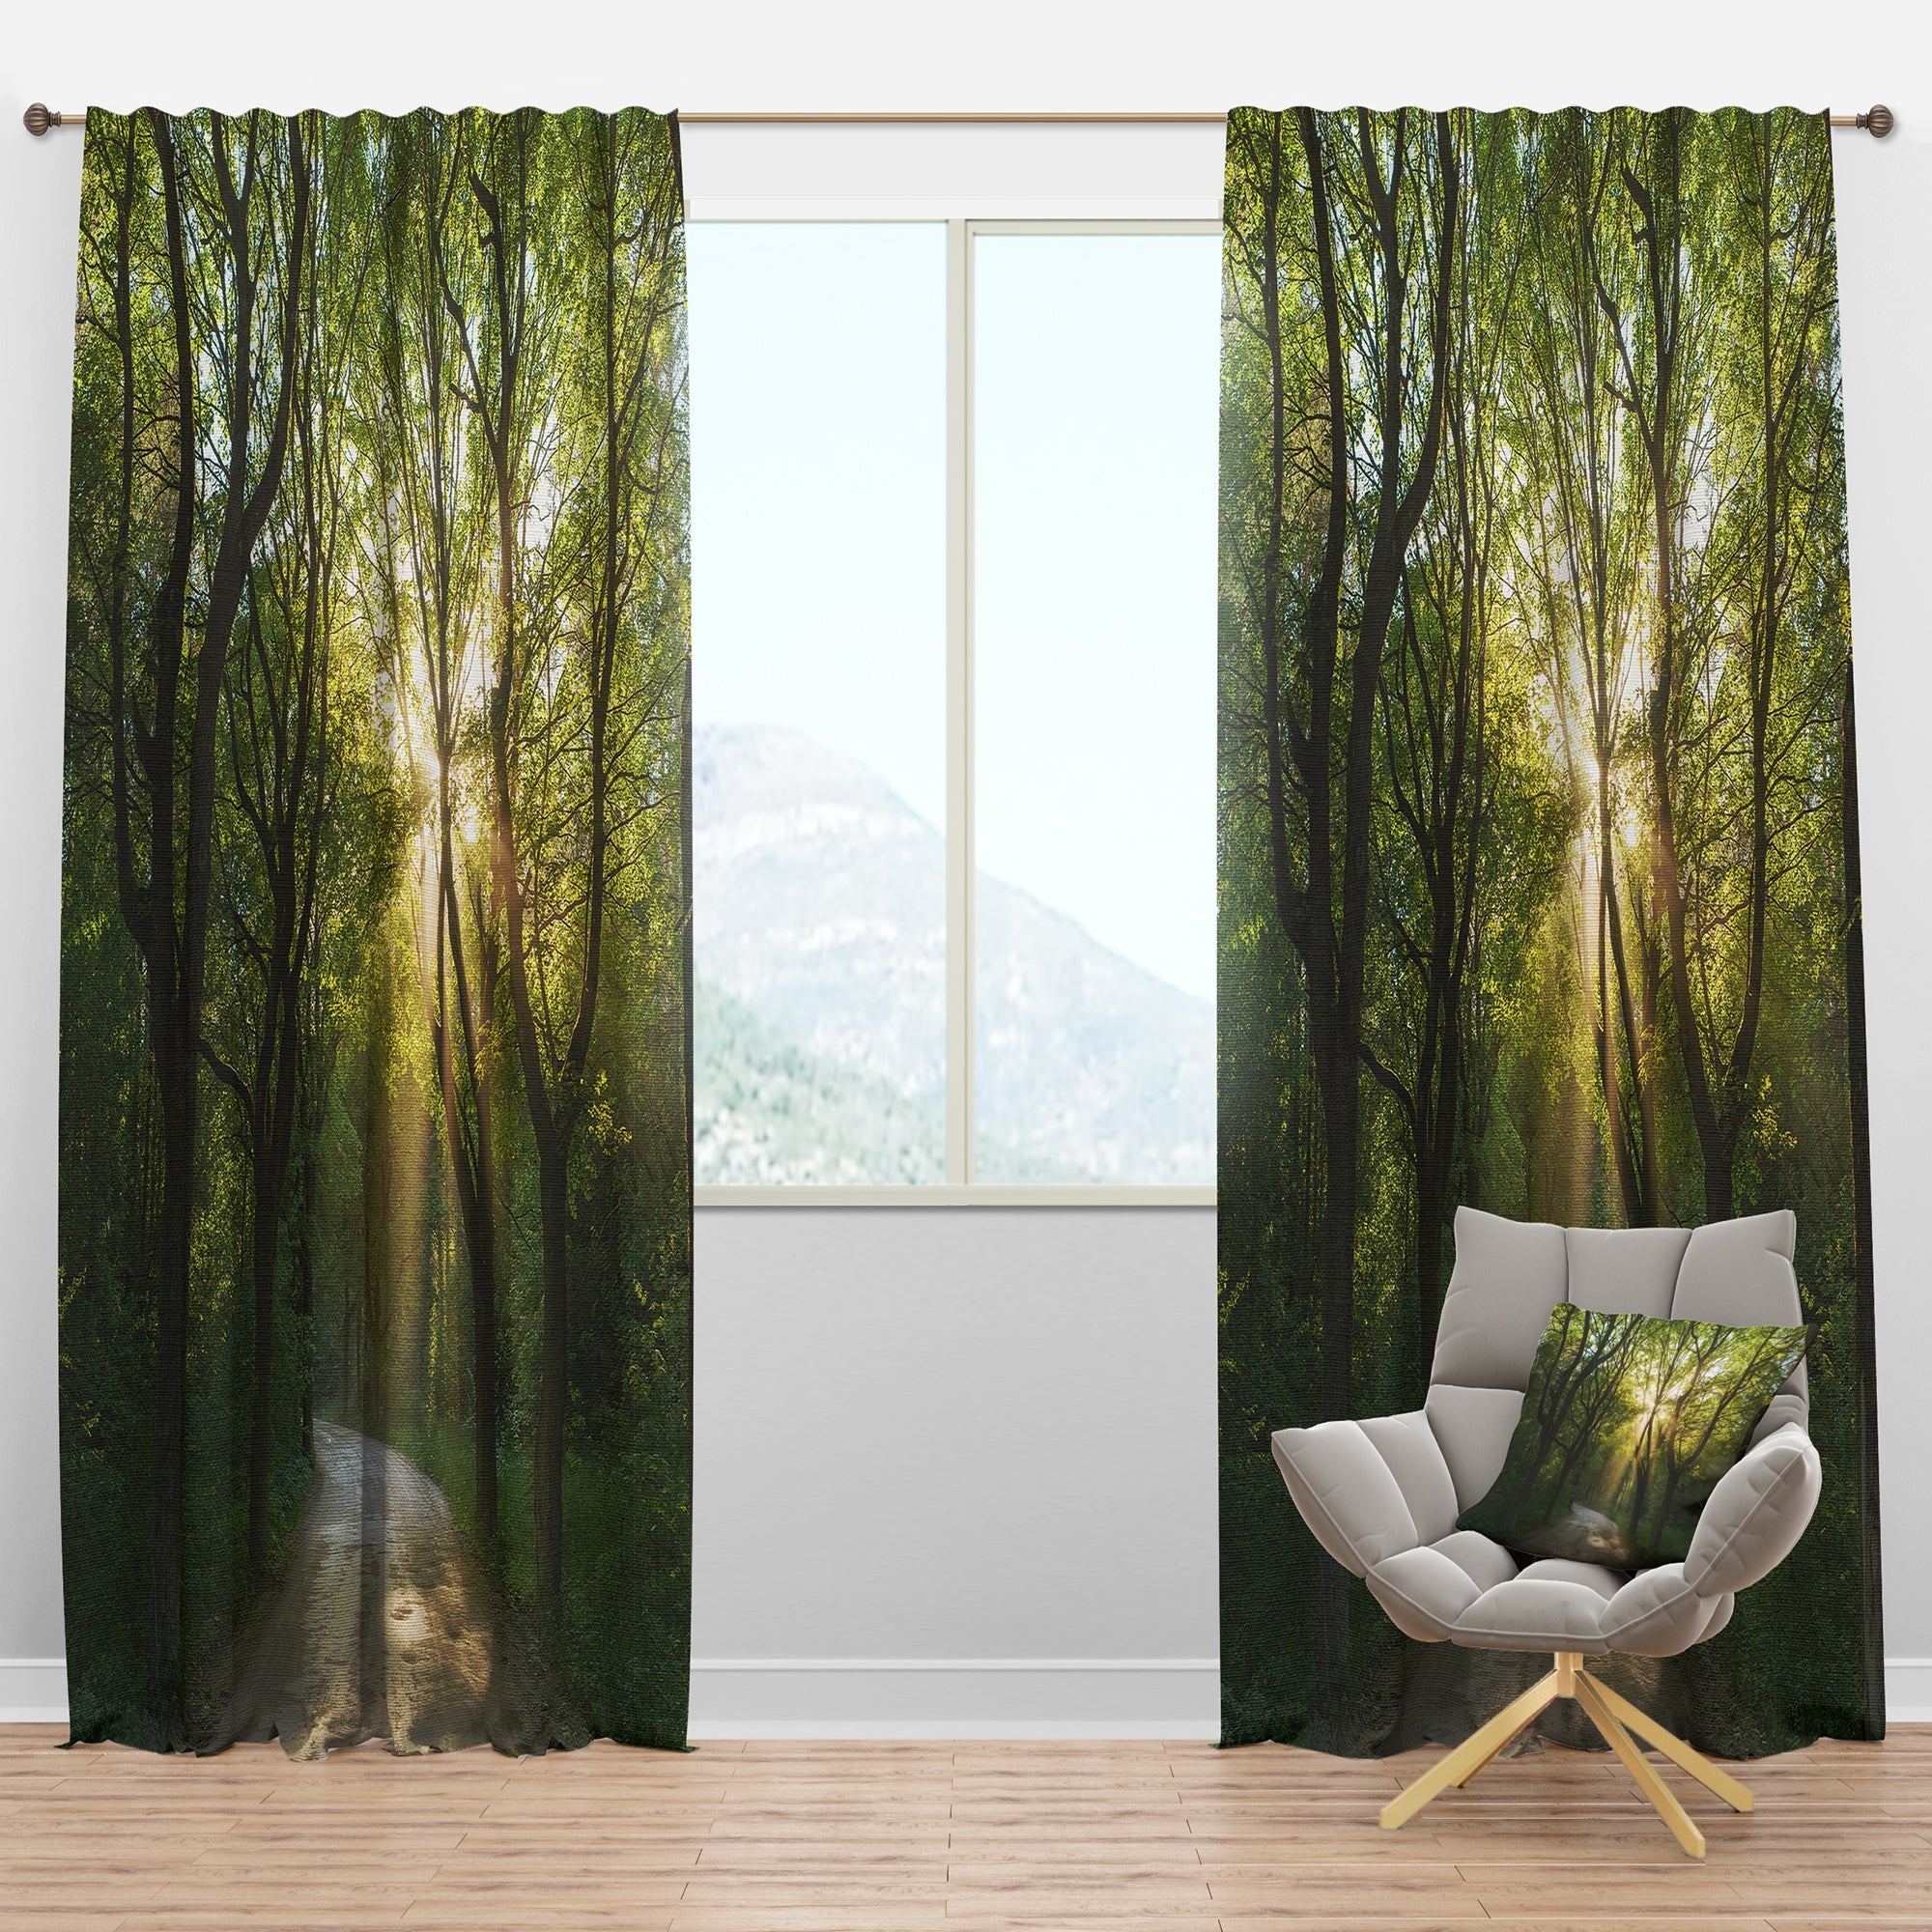 Evening in Green Forest' Landscape Curtain Panel